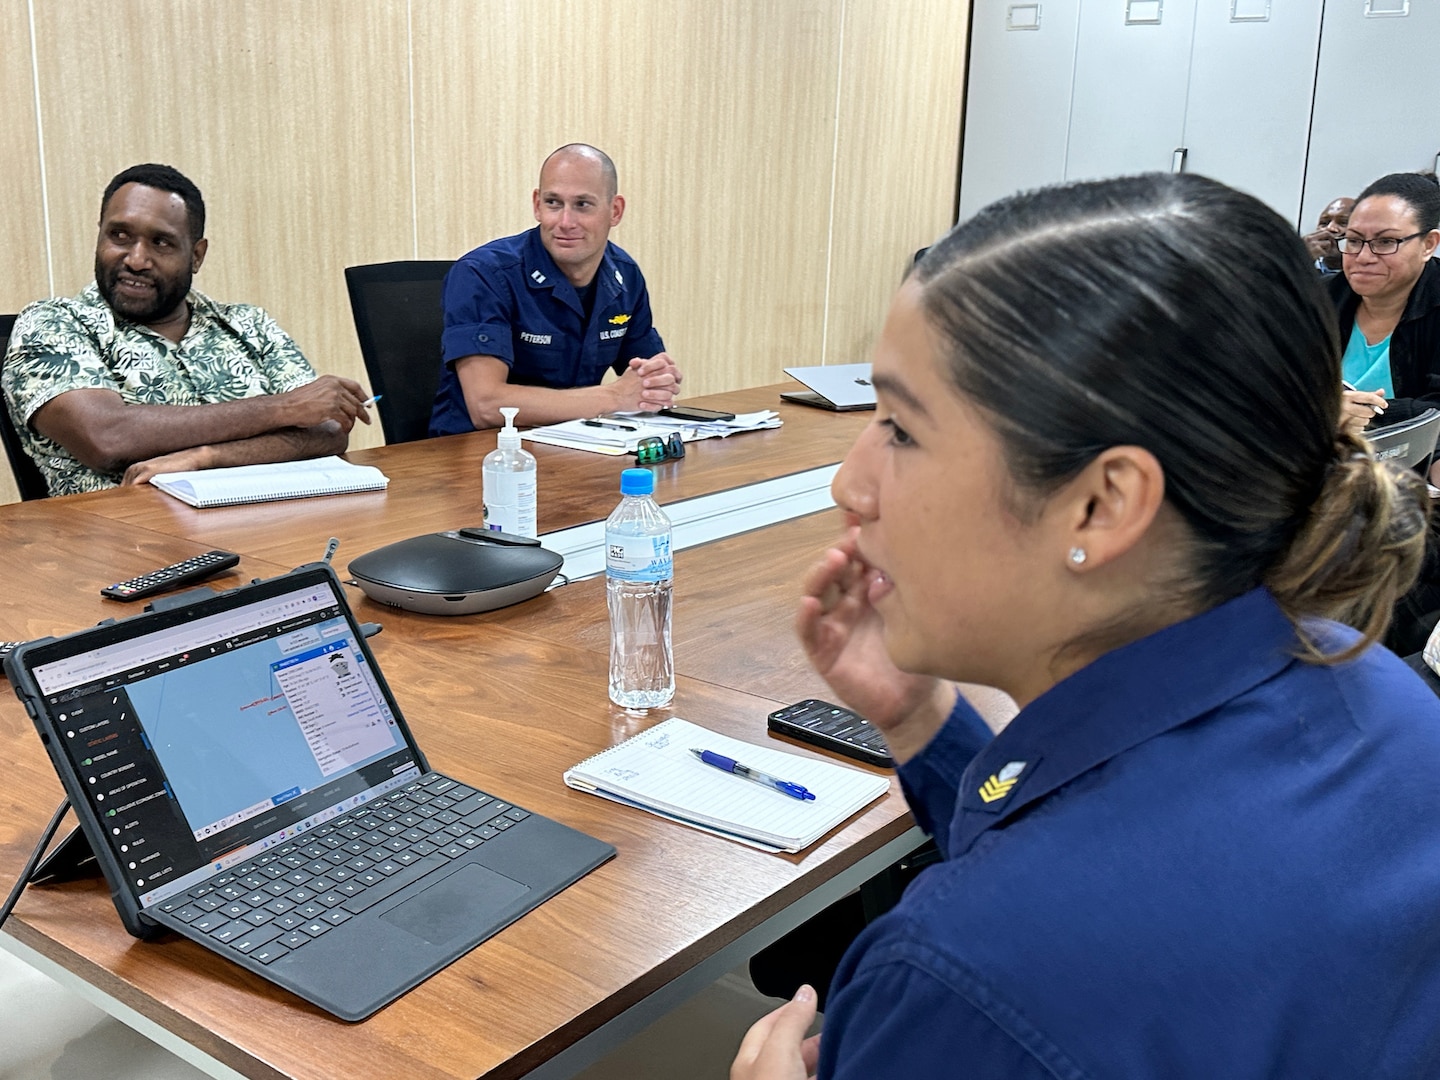 Petty Officer 1st Class Monse Rivera of U.S. Coast Guard 14th District gives partners at the Customs Services an overview of maritime domain awareness tools during a subject matter exchange in Port Moresby, Papua New Guinea, on 18, Aug. 2023. The U.S. Coast Guard is in Papua New Guinea at the invitation of the PNG government to join their lead in maritime operations to combat illegal fishing and safeguard maritime resources following the recent signing and ratification of the bilateral agreement between the United States and Papua New Guinea. (U.S. Coast Guard photo by Chief Warrant Officer Sara Muir)